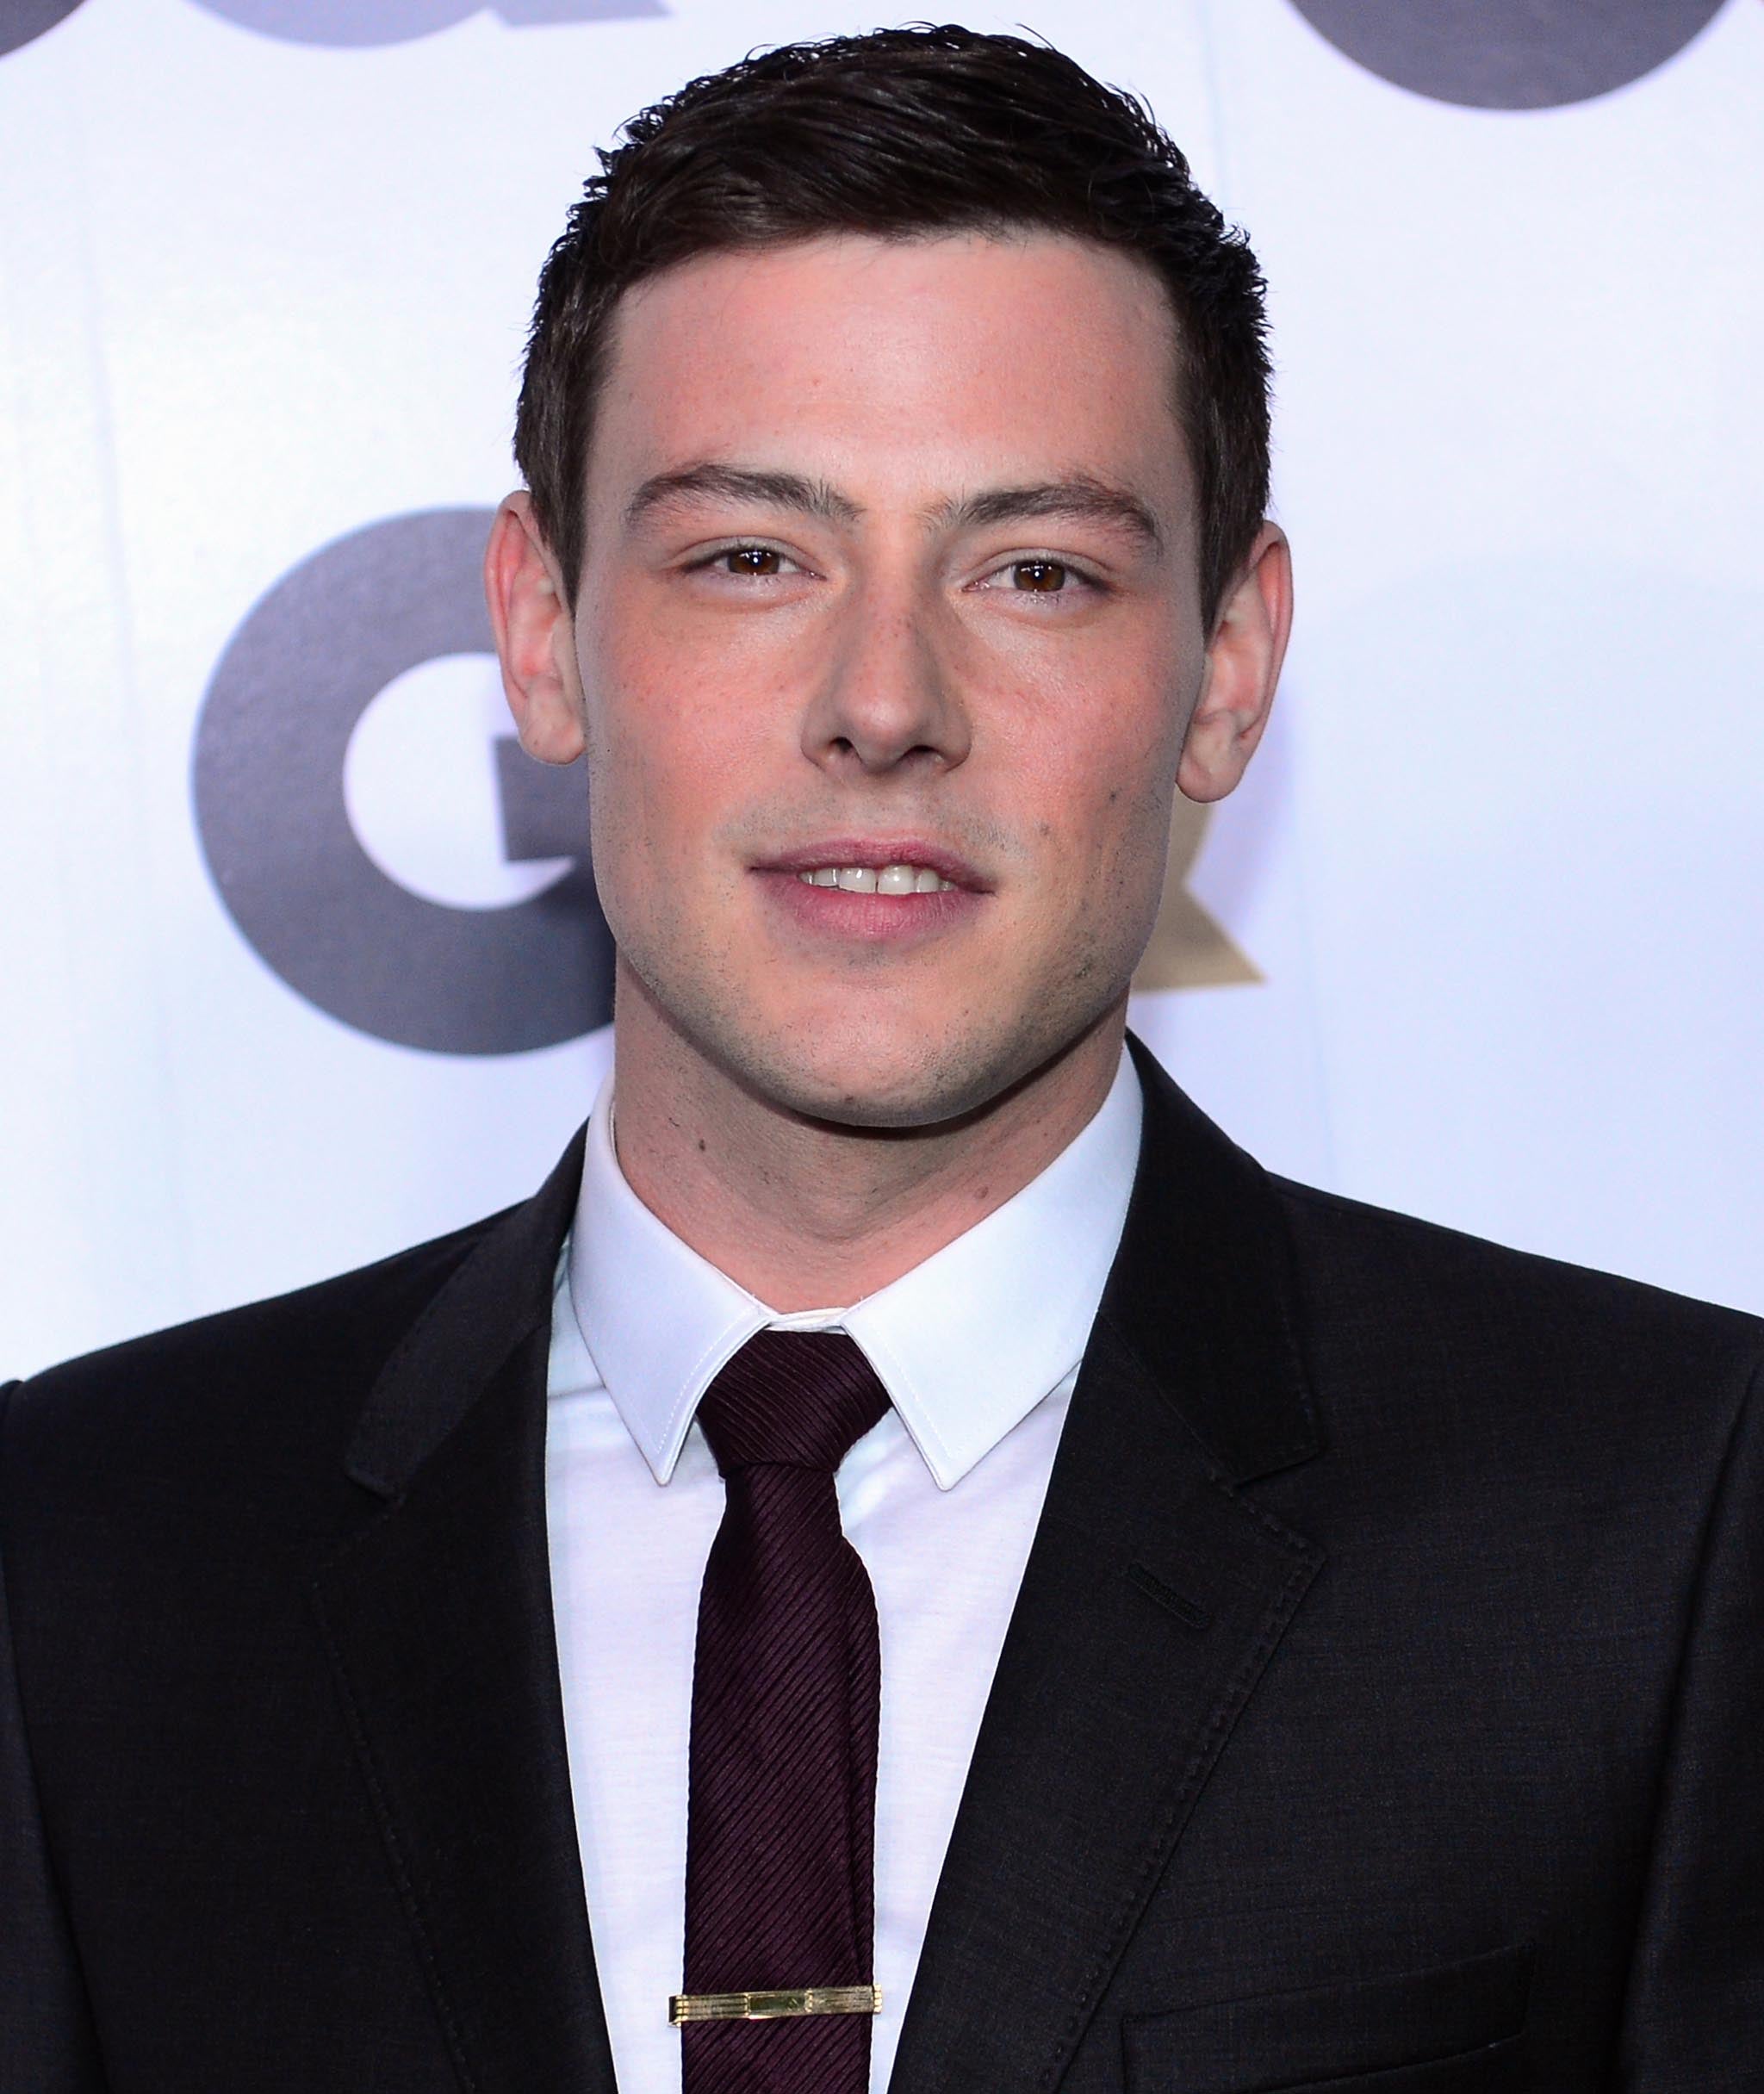 Cory Monteith at the GQ Men of the Year Party, 2012